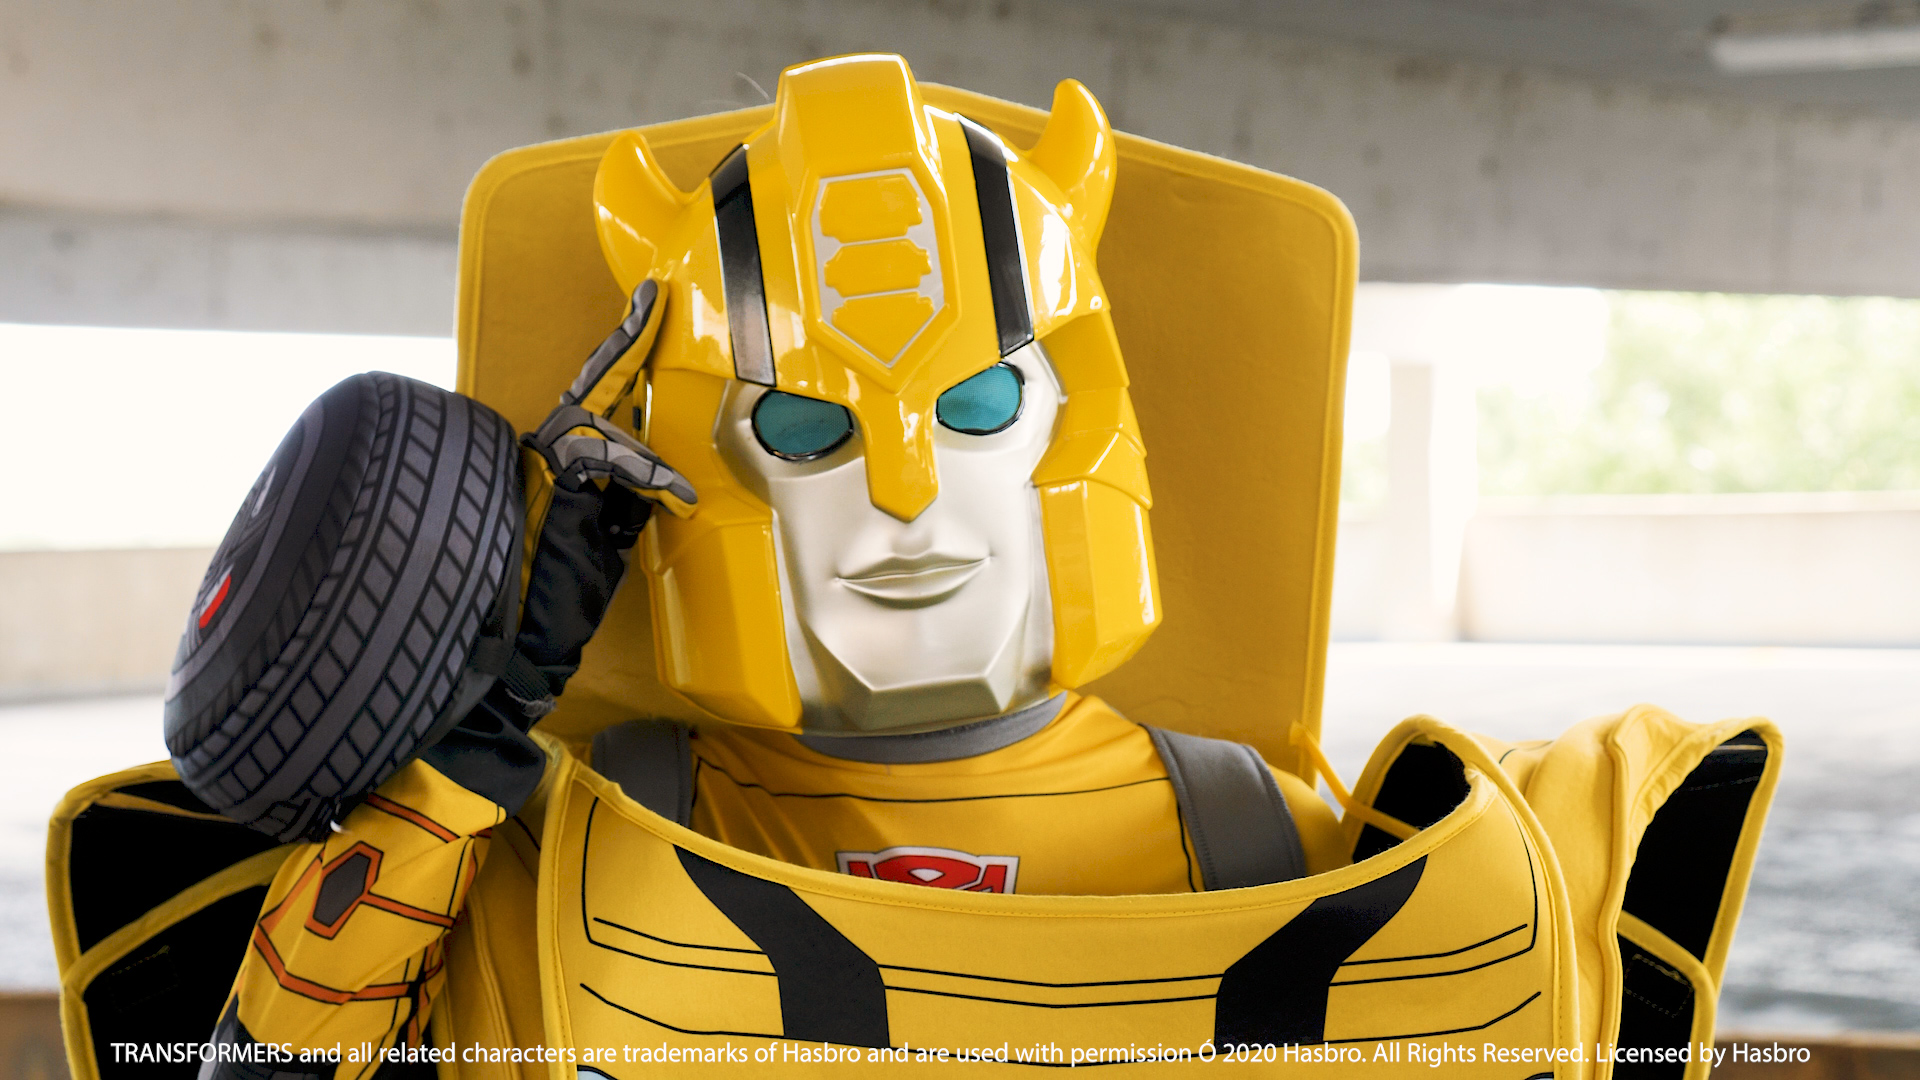 Your kid will have the coolest costume on the block with the Transformers Kids Bumblebee Converting Costume, which actually transforms from the Bumblebee robot to the car.